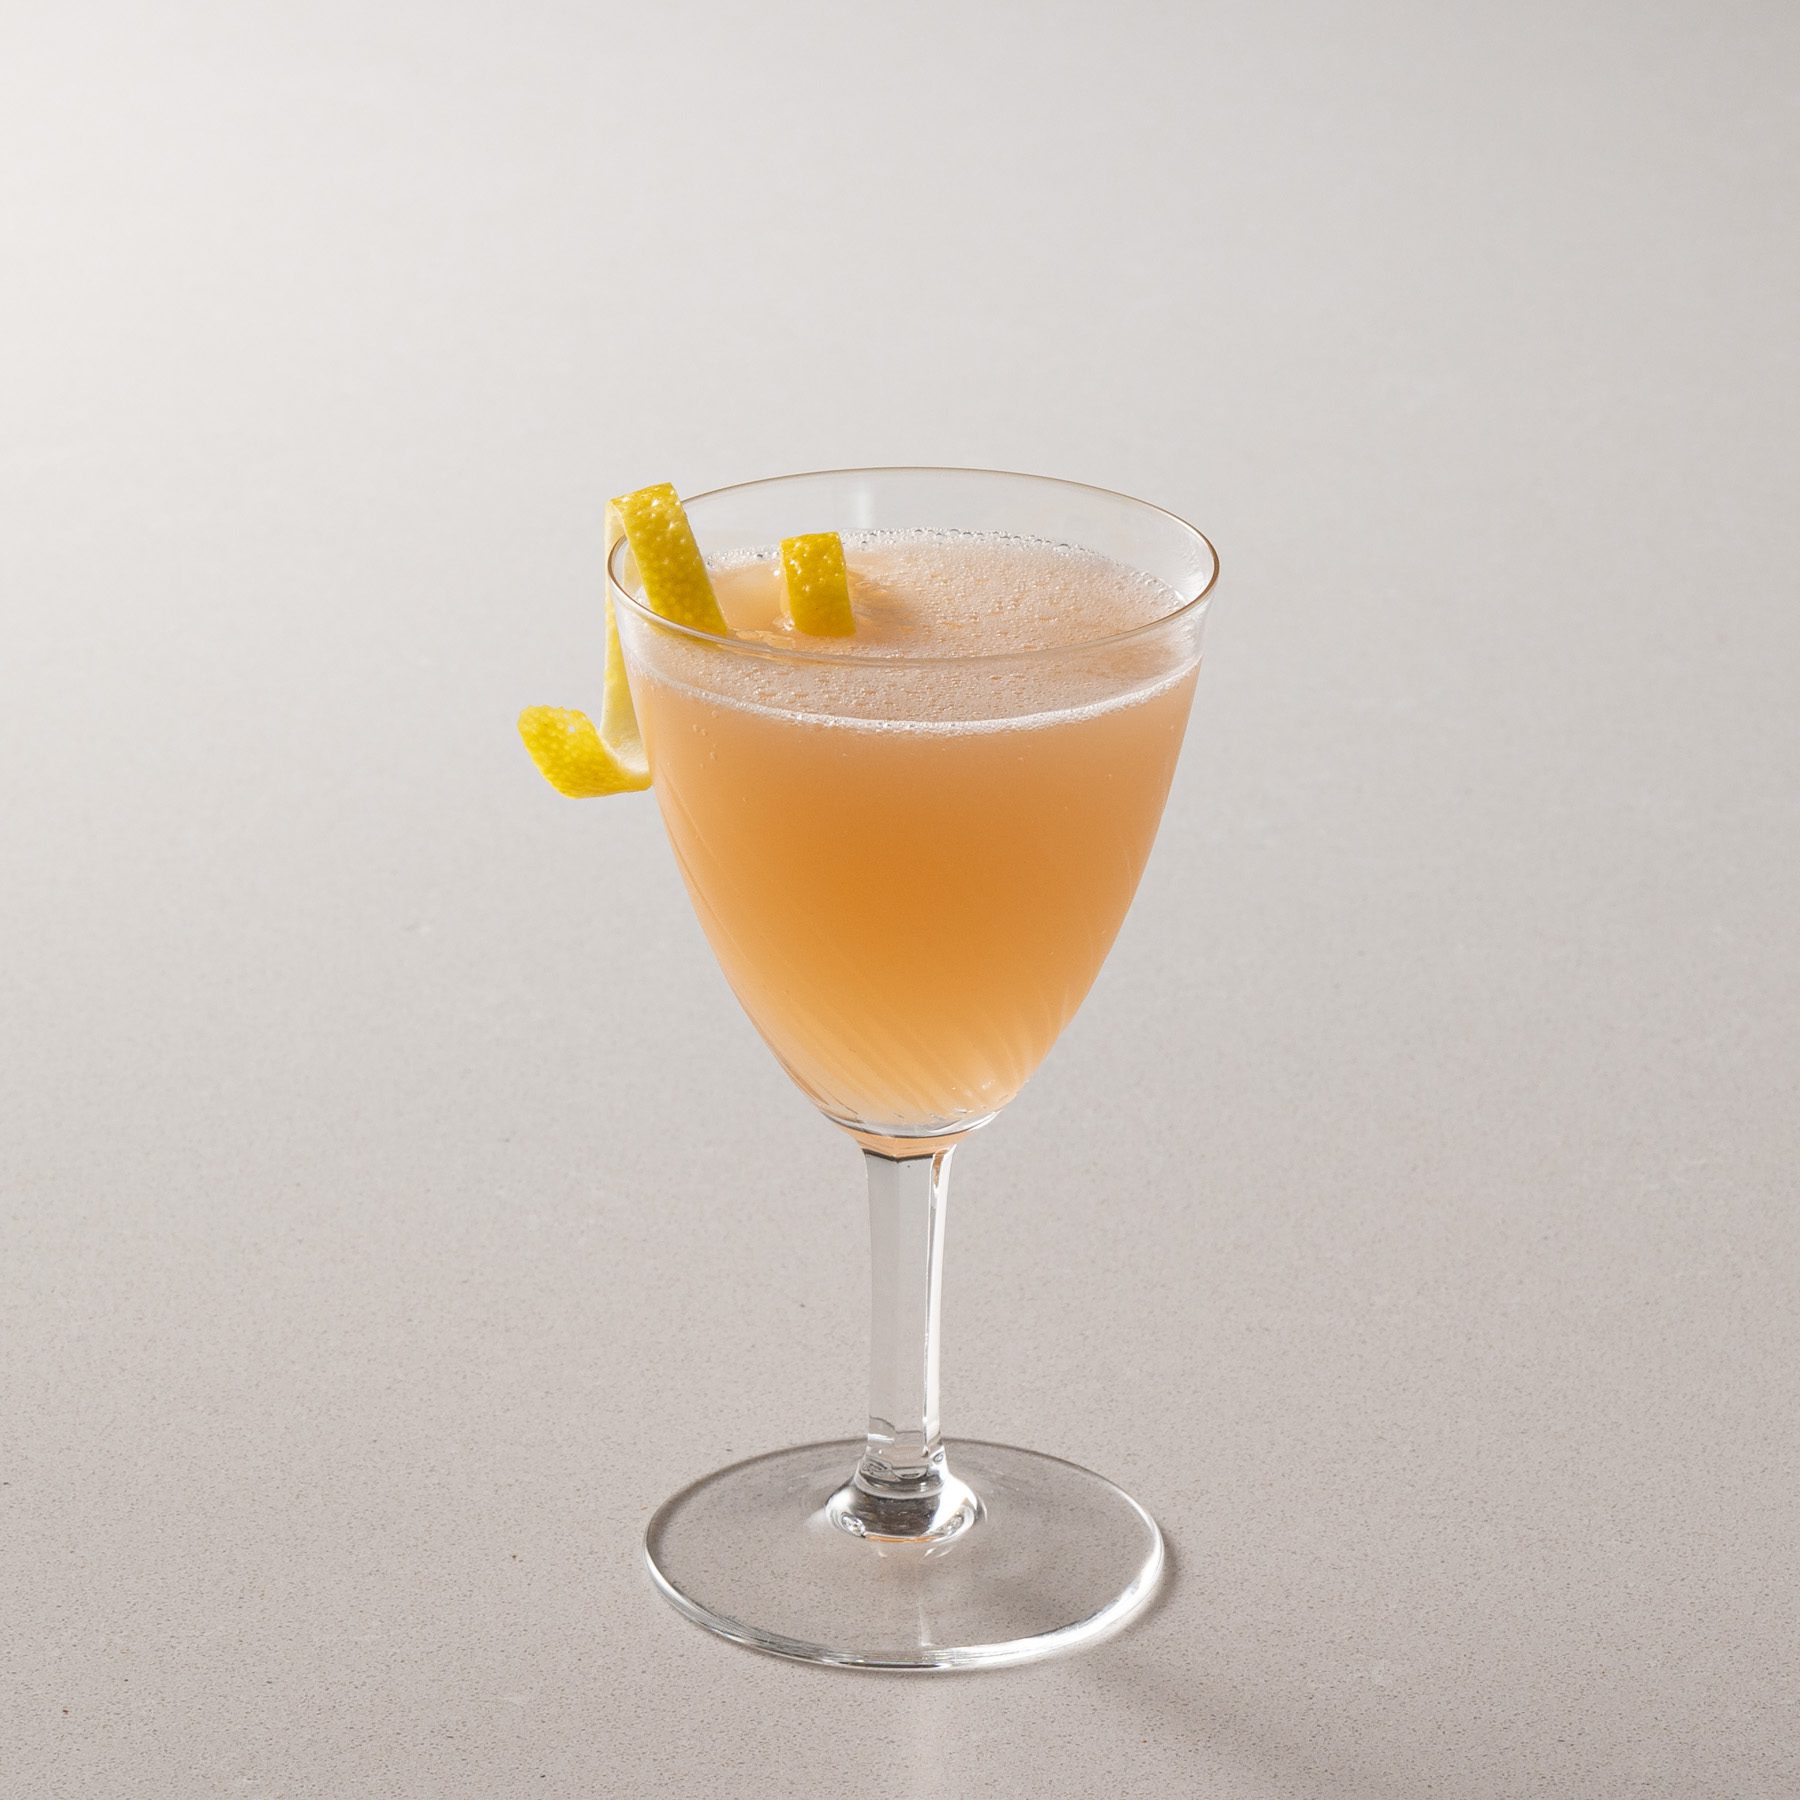 Army & Navy cocktail